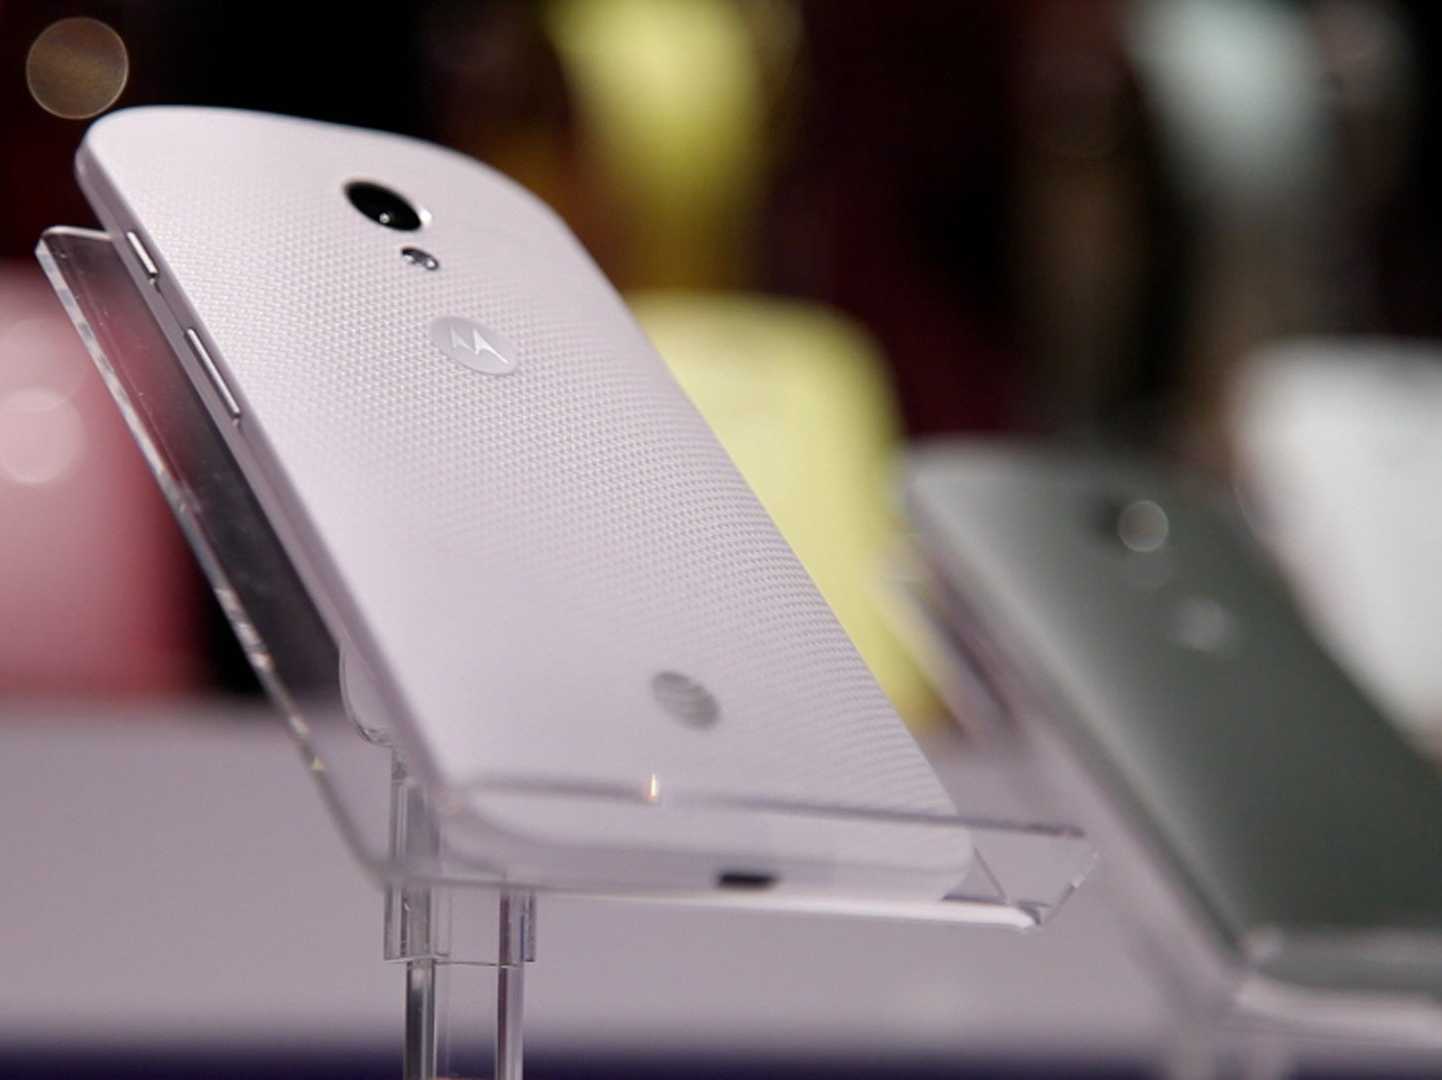 motorola-moto-x-frandroid-frandroid-heres-your-first-hands-on-look-at-the-moto-x